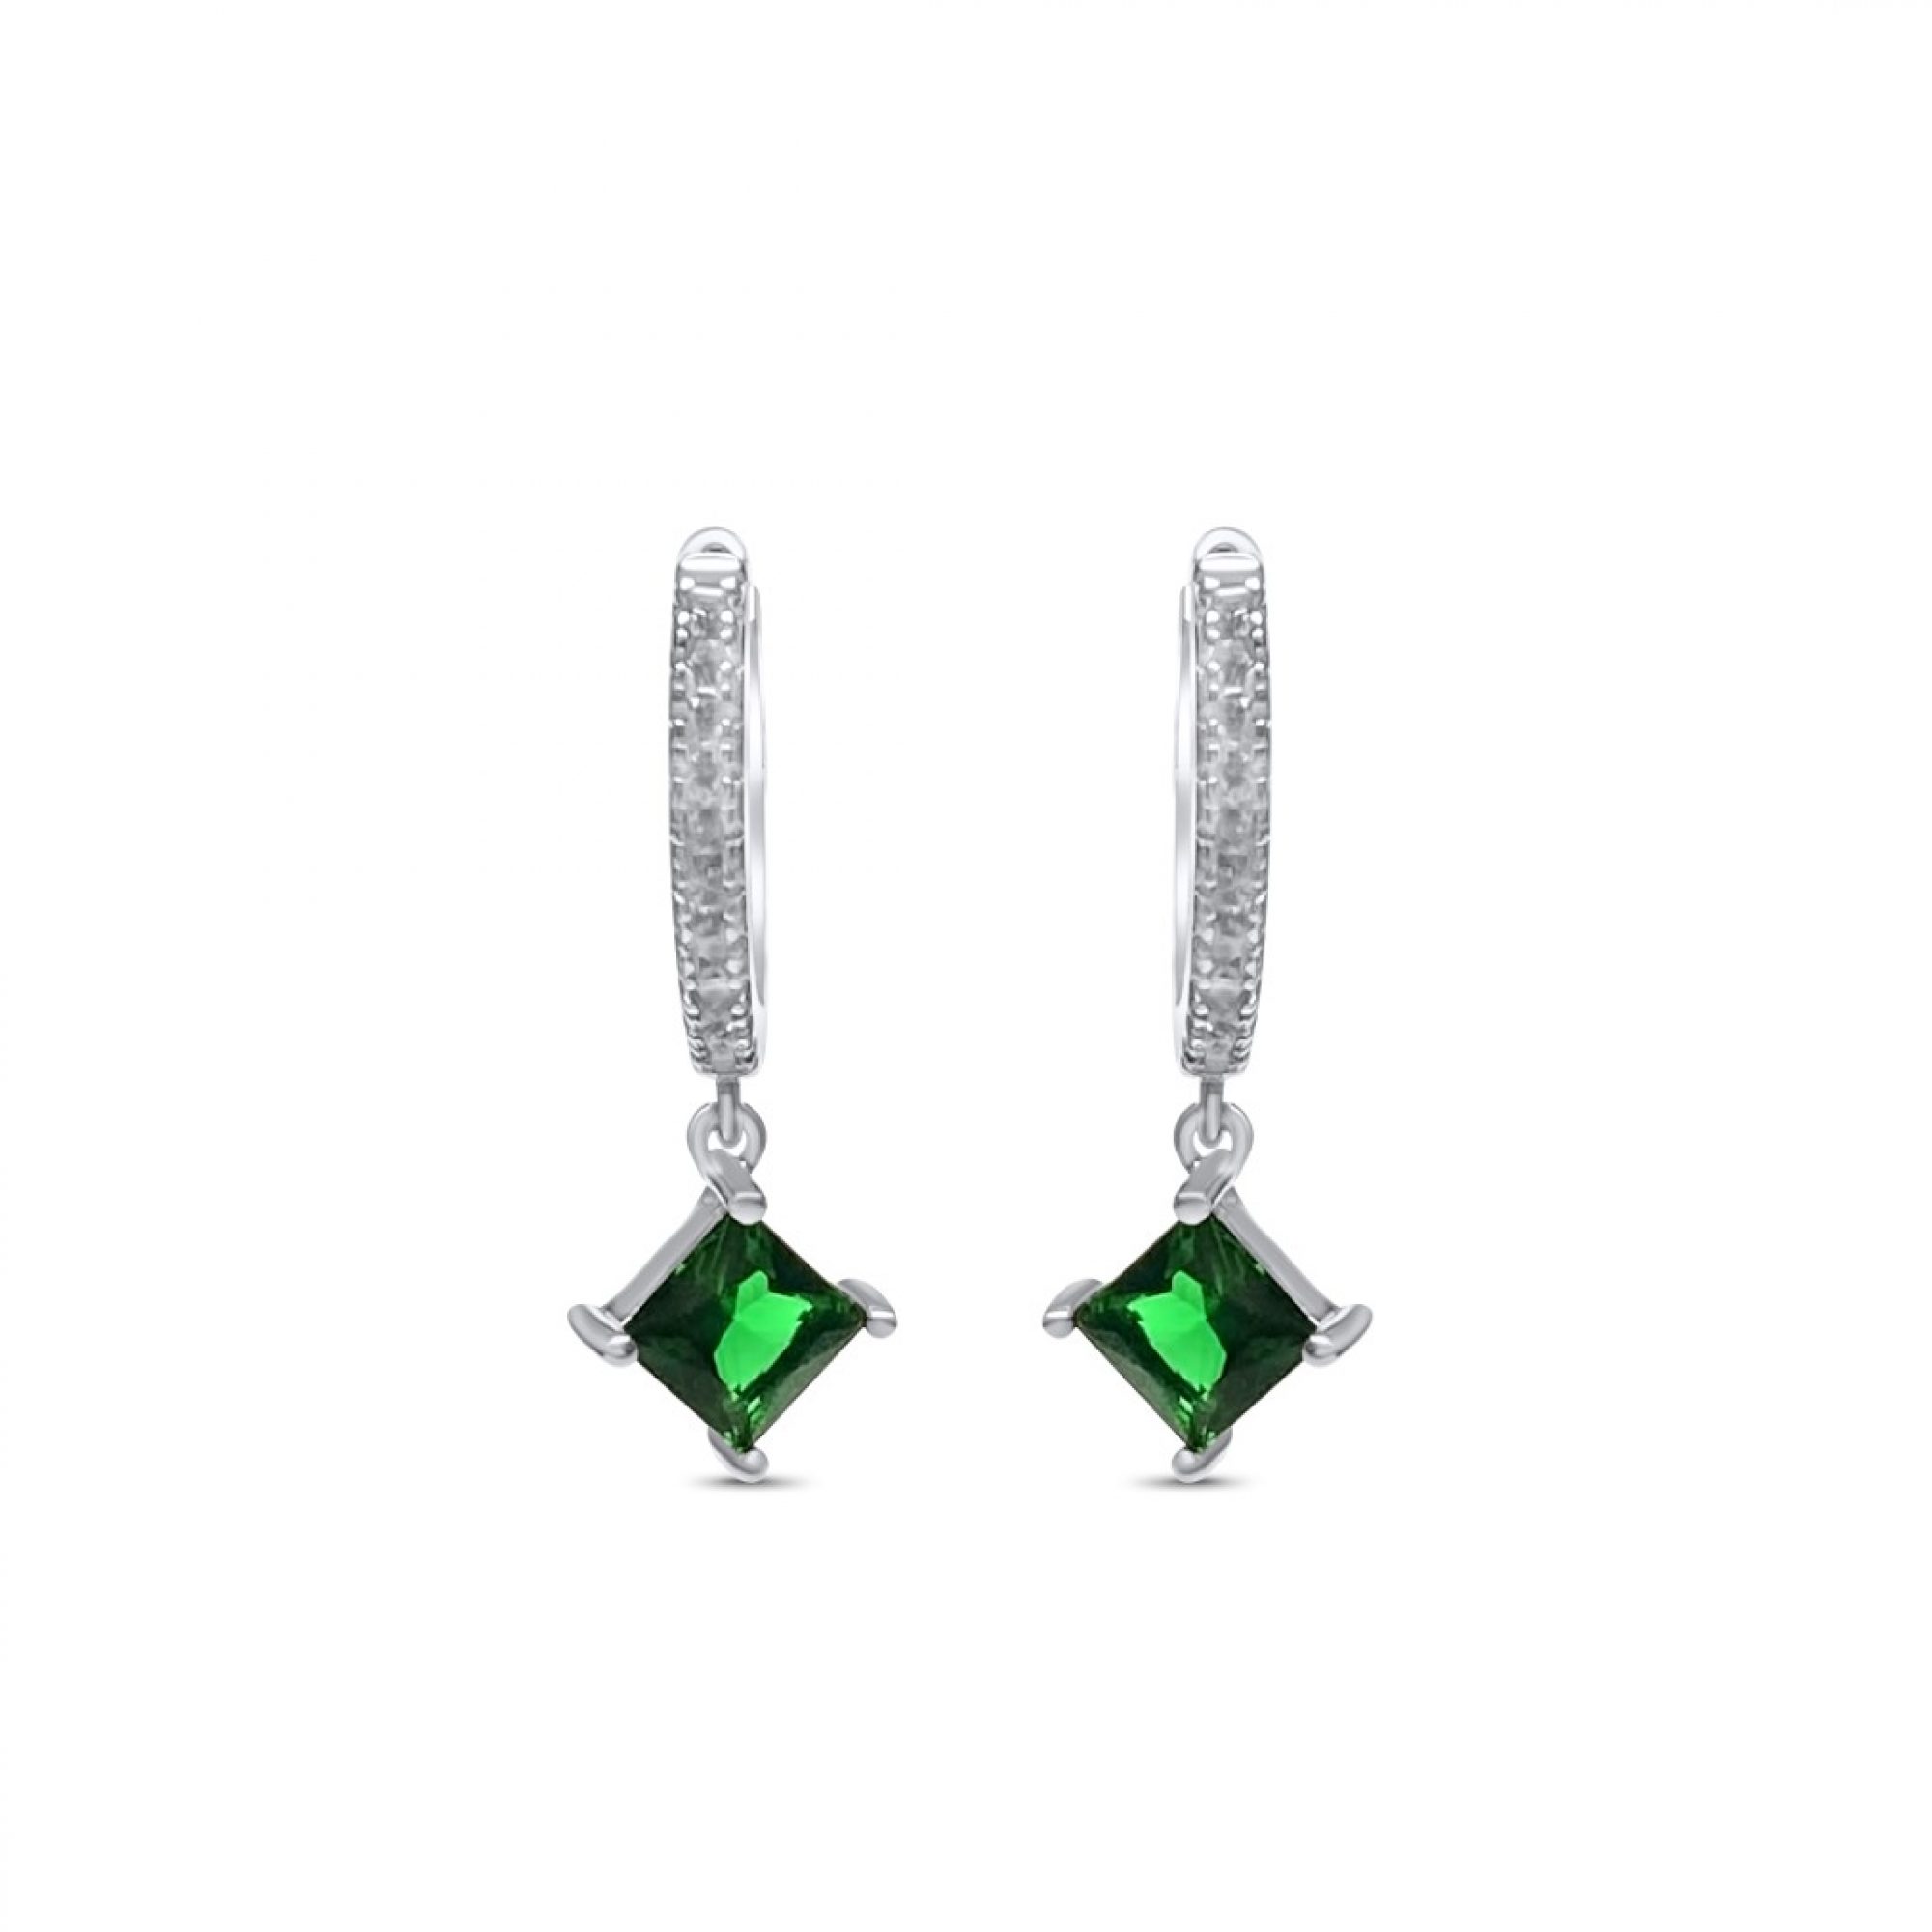 Silver earrings with emerald and zircon stones